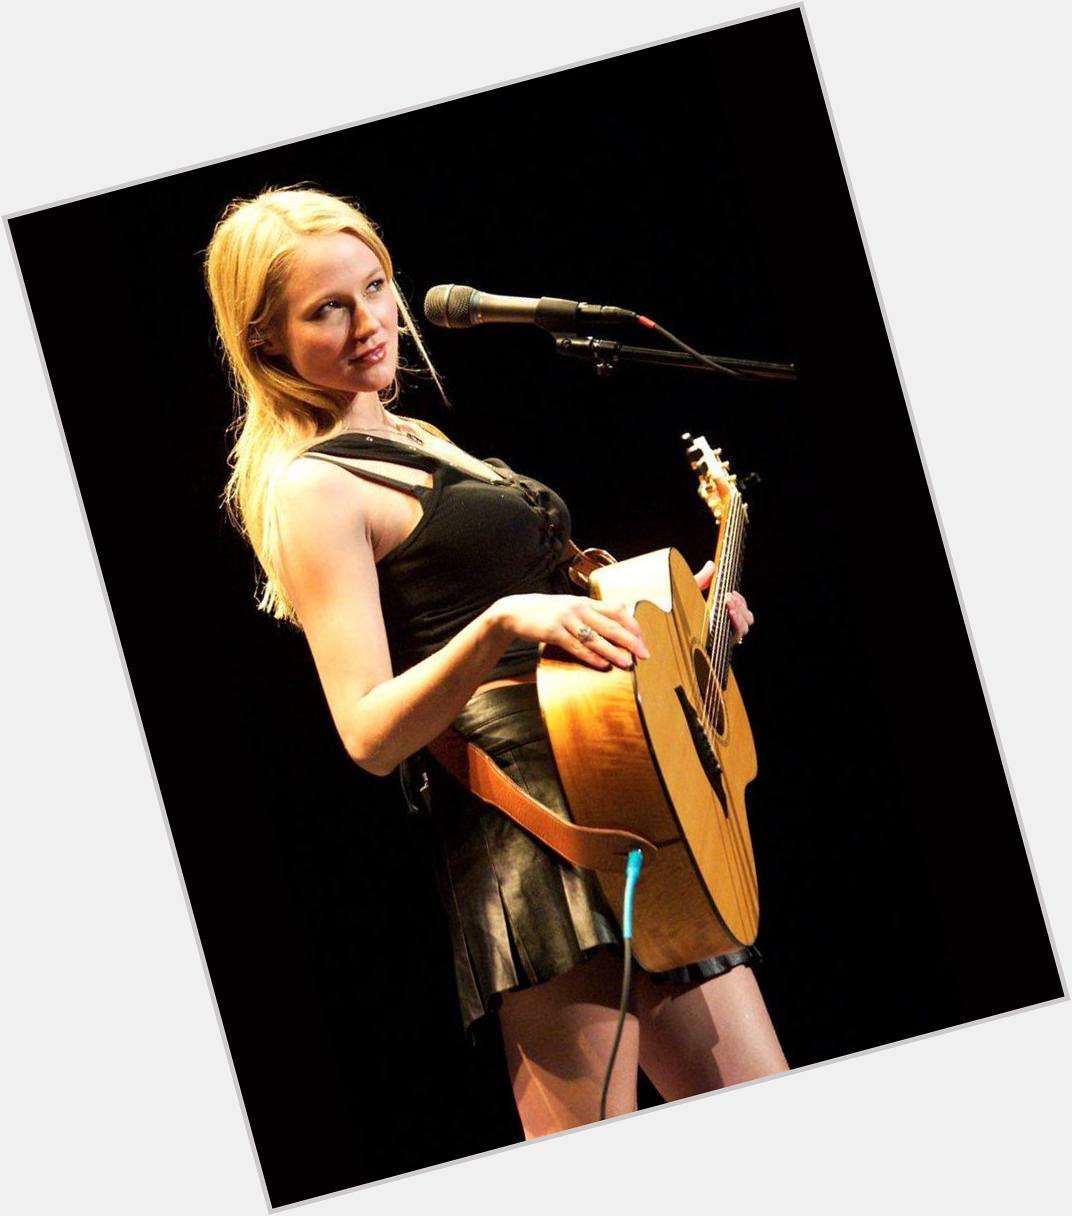 Happy Birthday to Jewel Kilcher, or just plain old Jewel, who turns 45 today! 